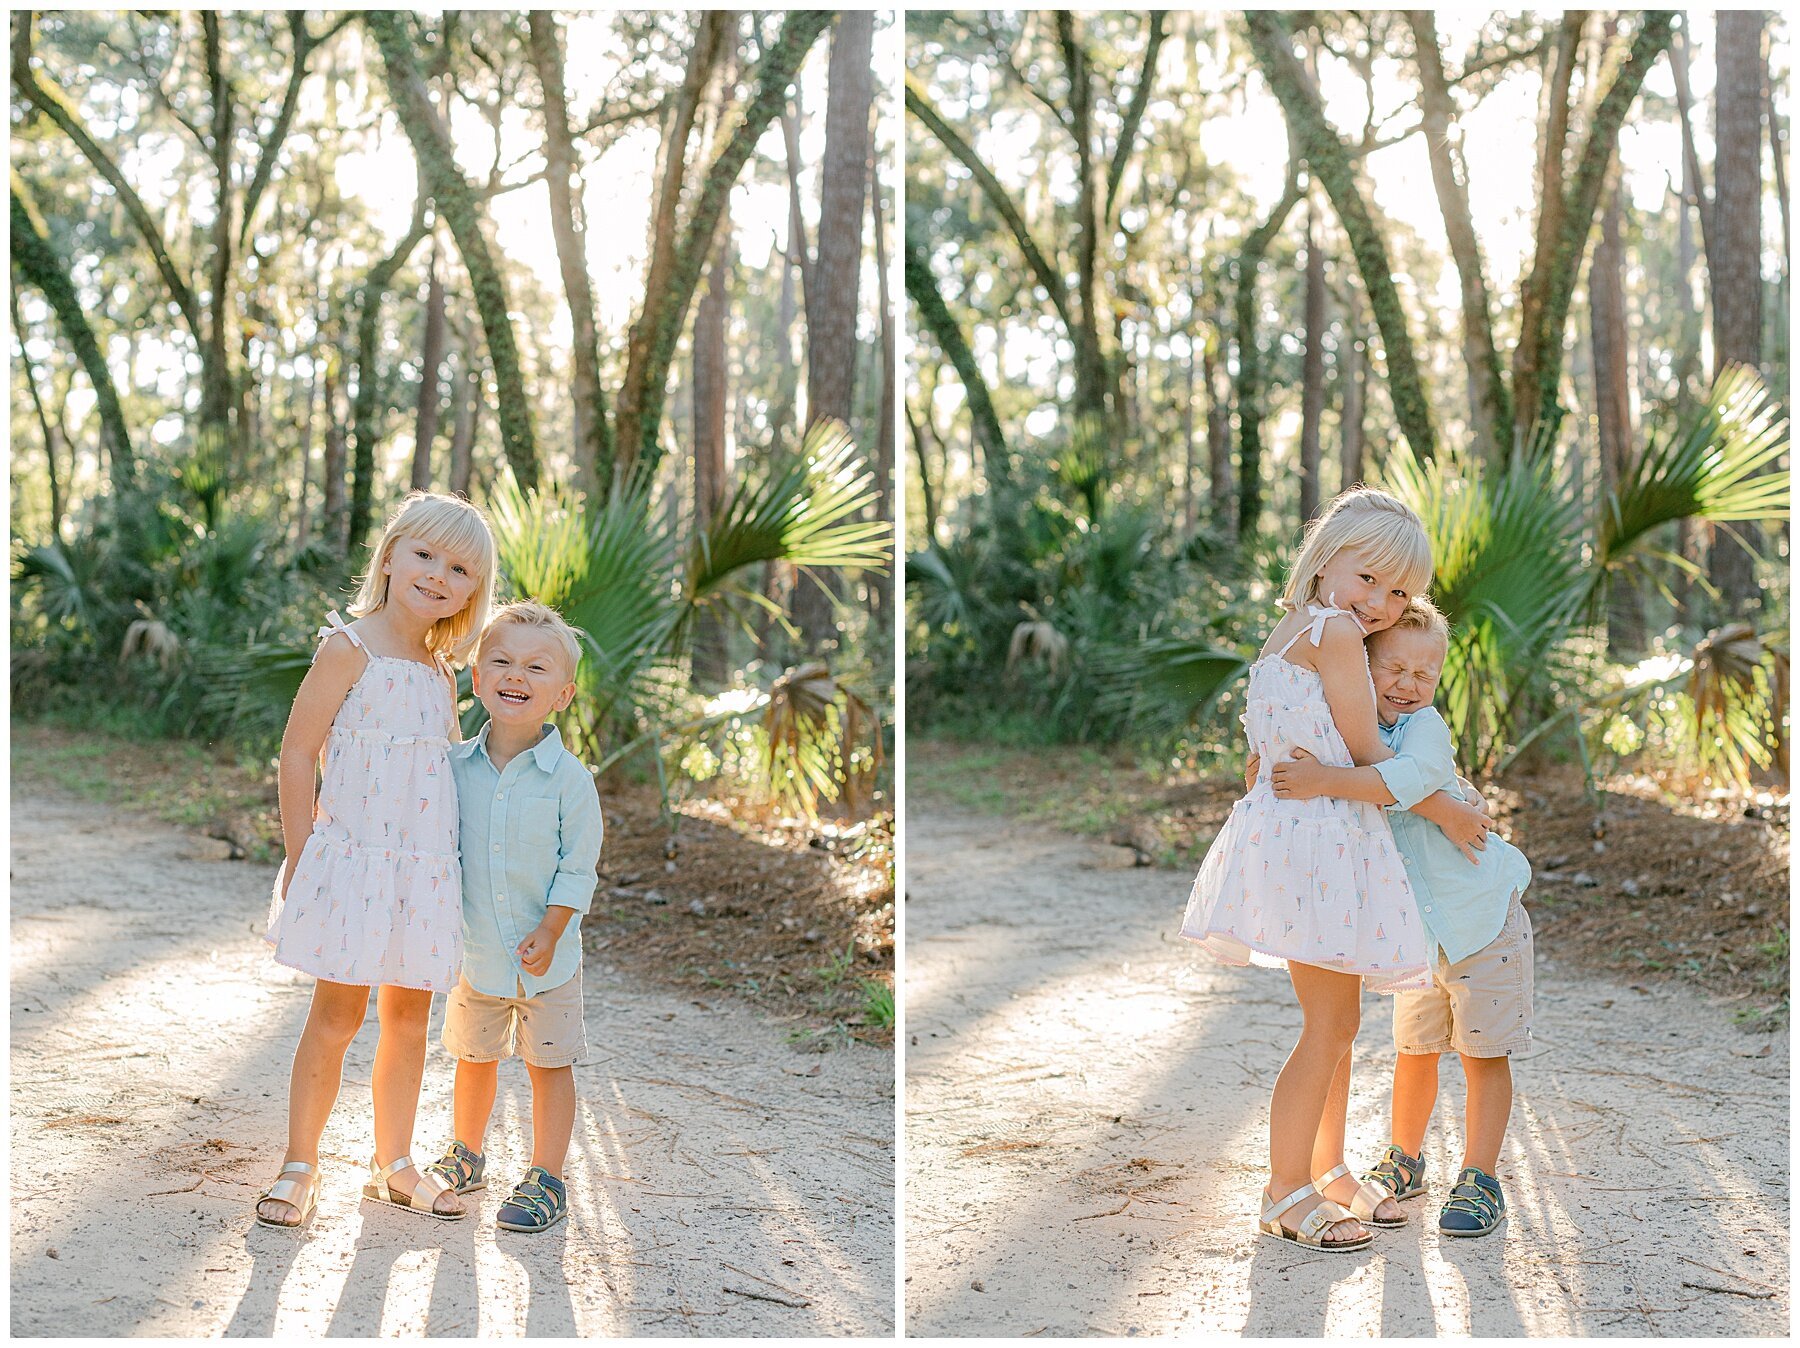 Katherine_Ives_Photography_Mcmillen_Montage_Palmetto_Bluff_8.jpg